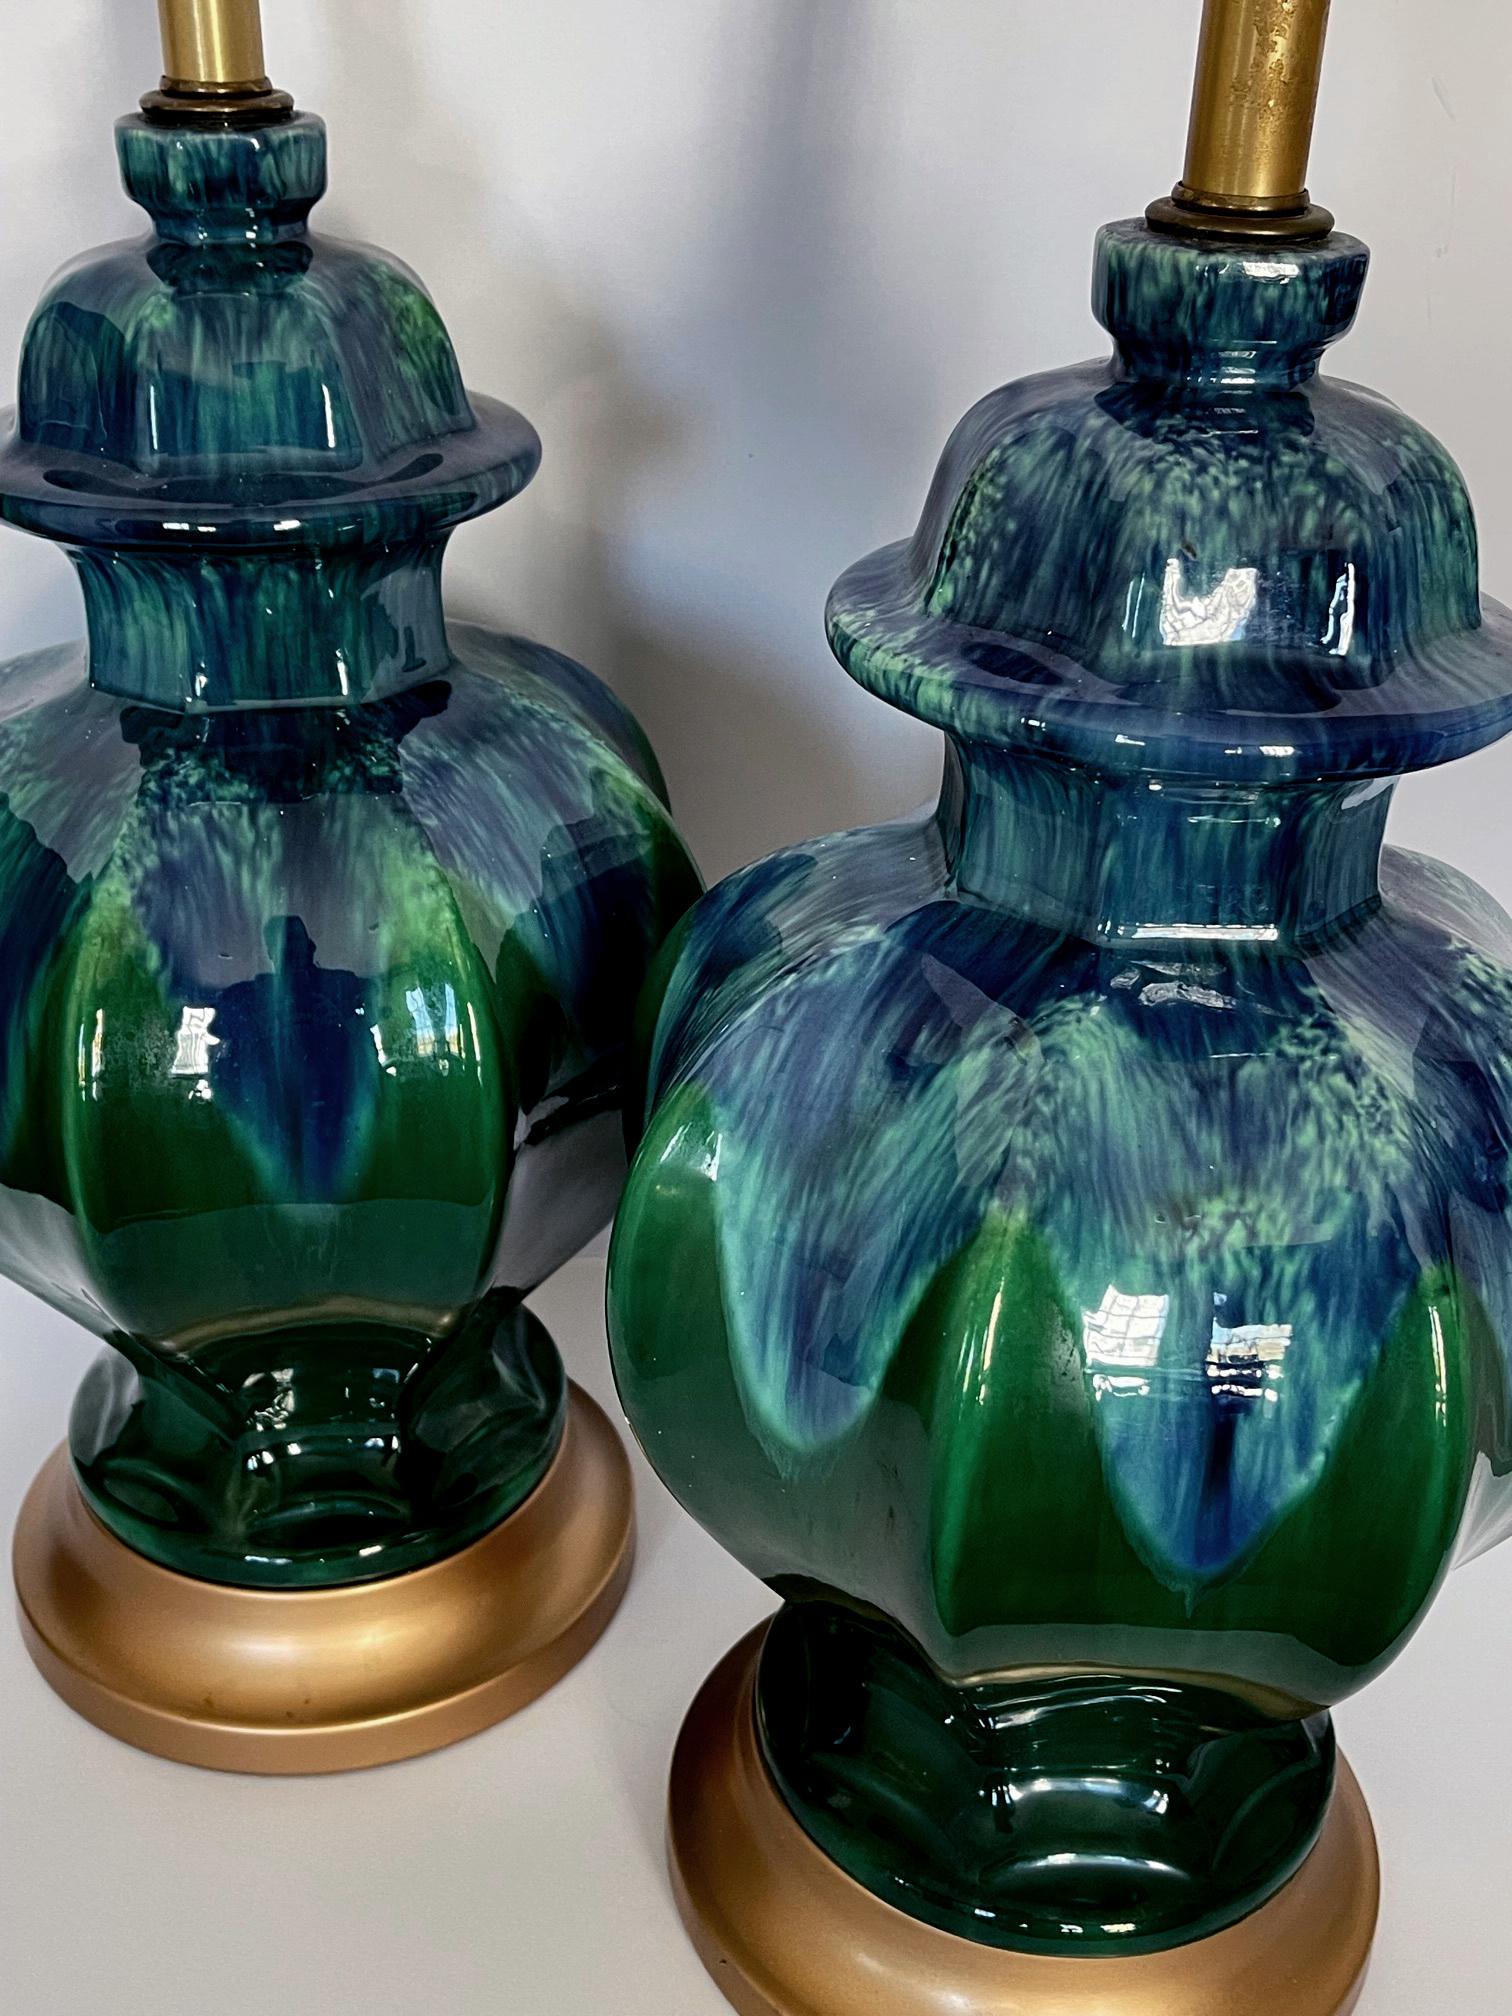 Each of ginger jar form with scalloped octagonal body; all in a richly-colored blue and green drip glaze.